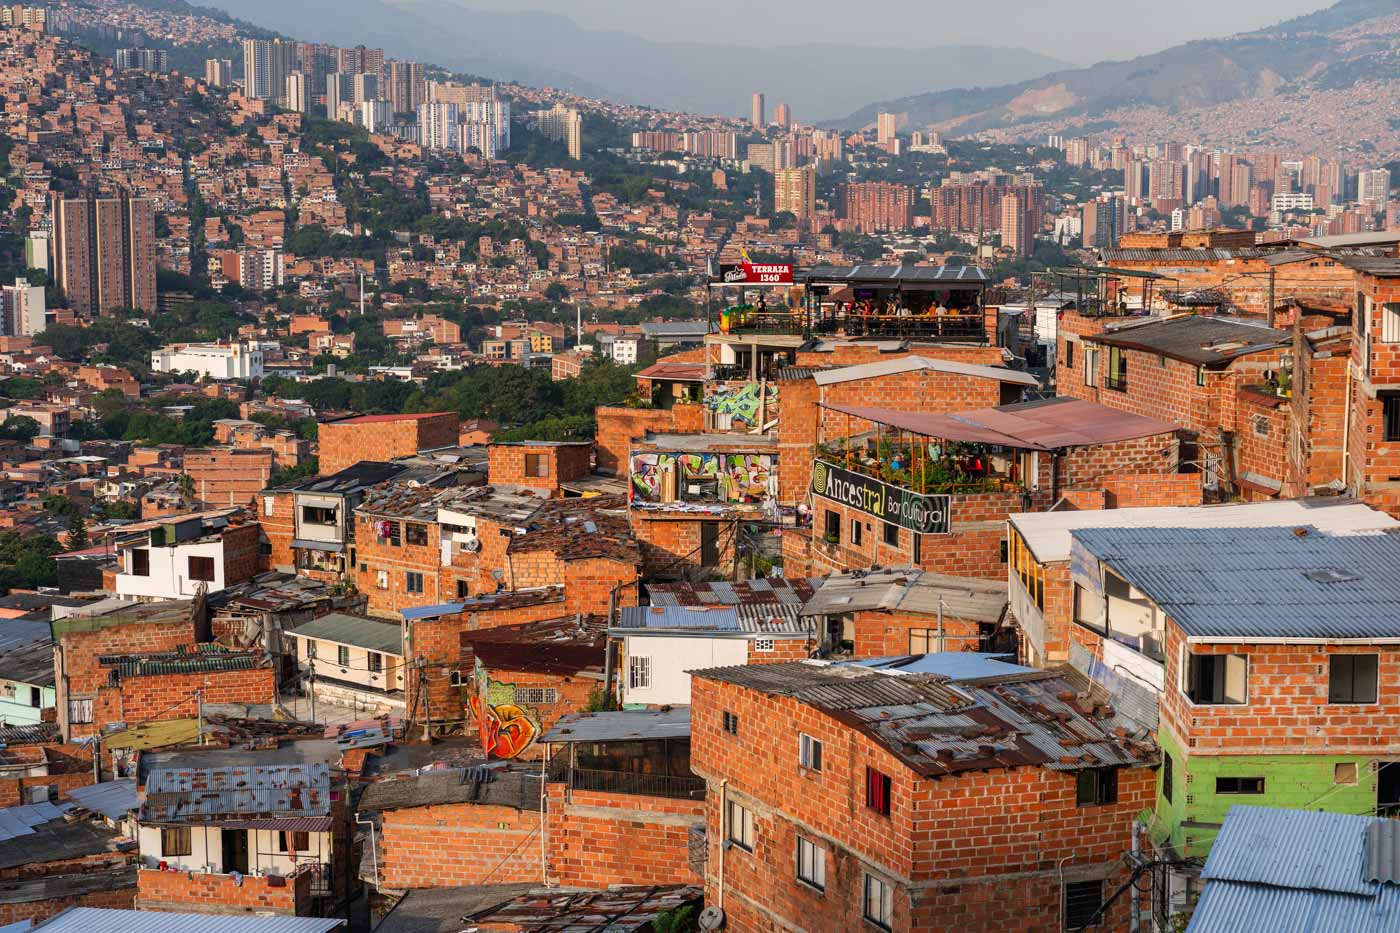 A view across Comuna 13 to a 360 degree view bar and Medellin city in the background.